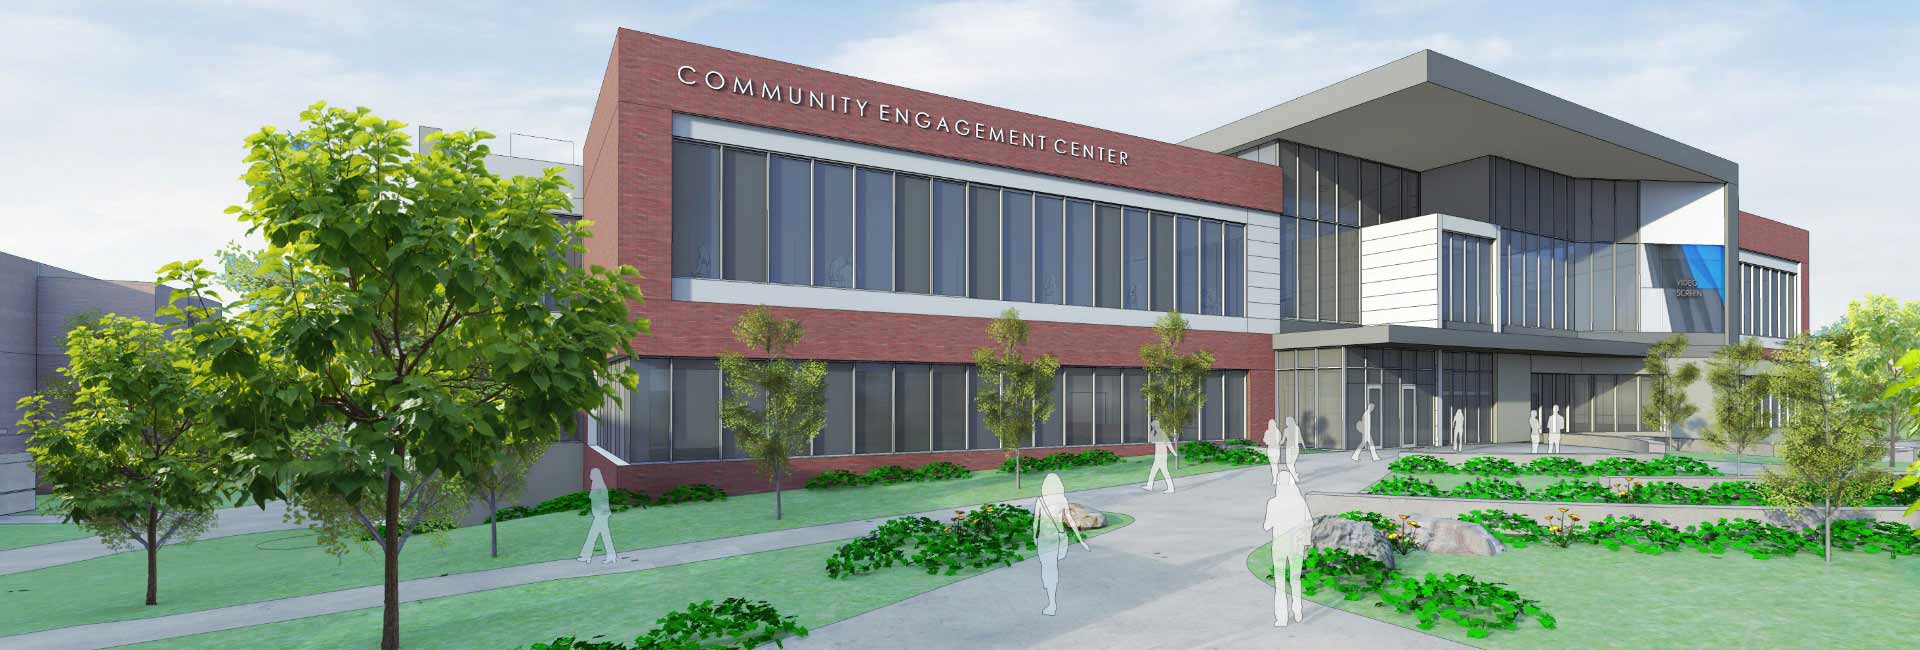 A rendering of the Community Engagement Center